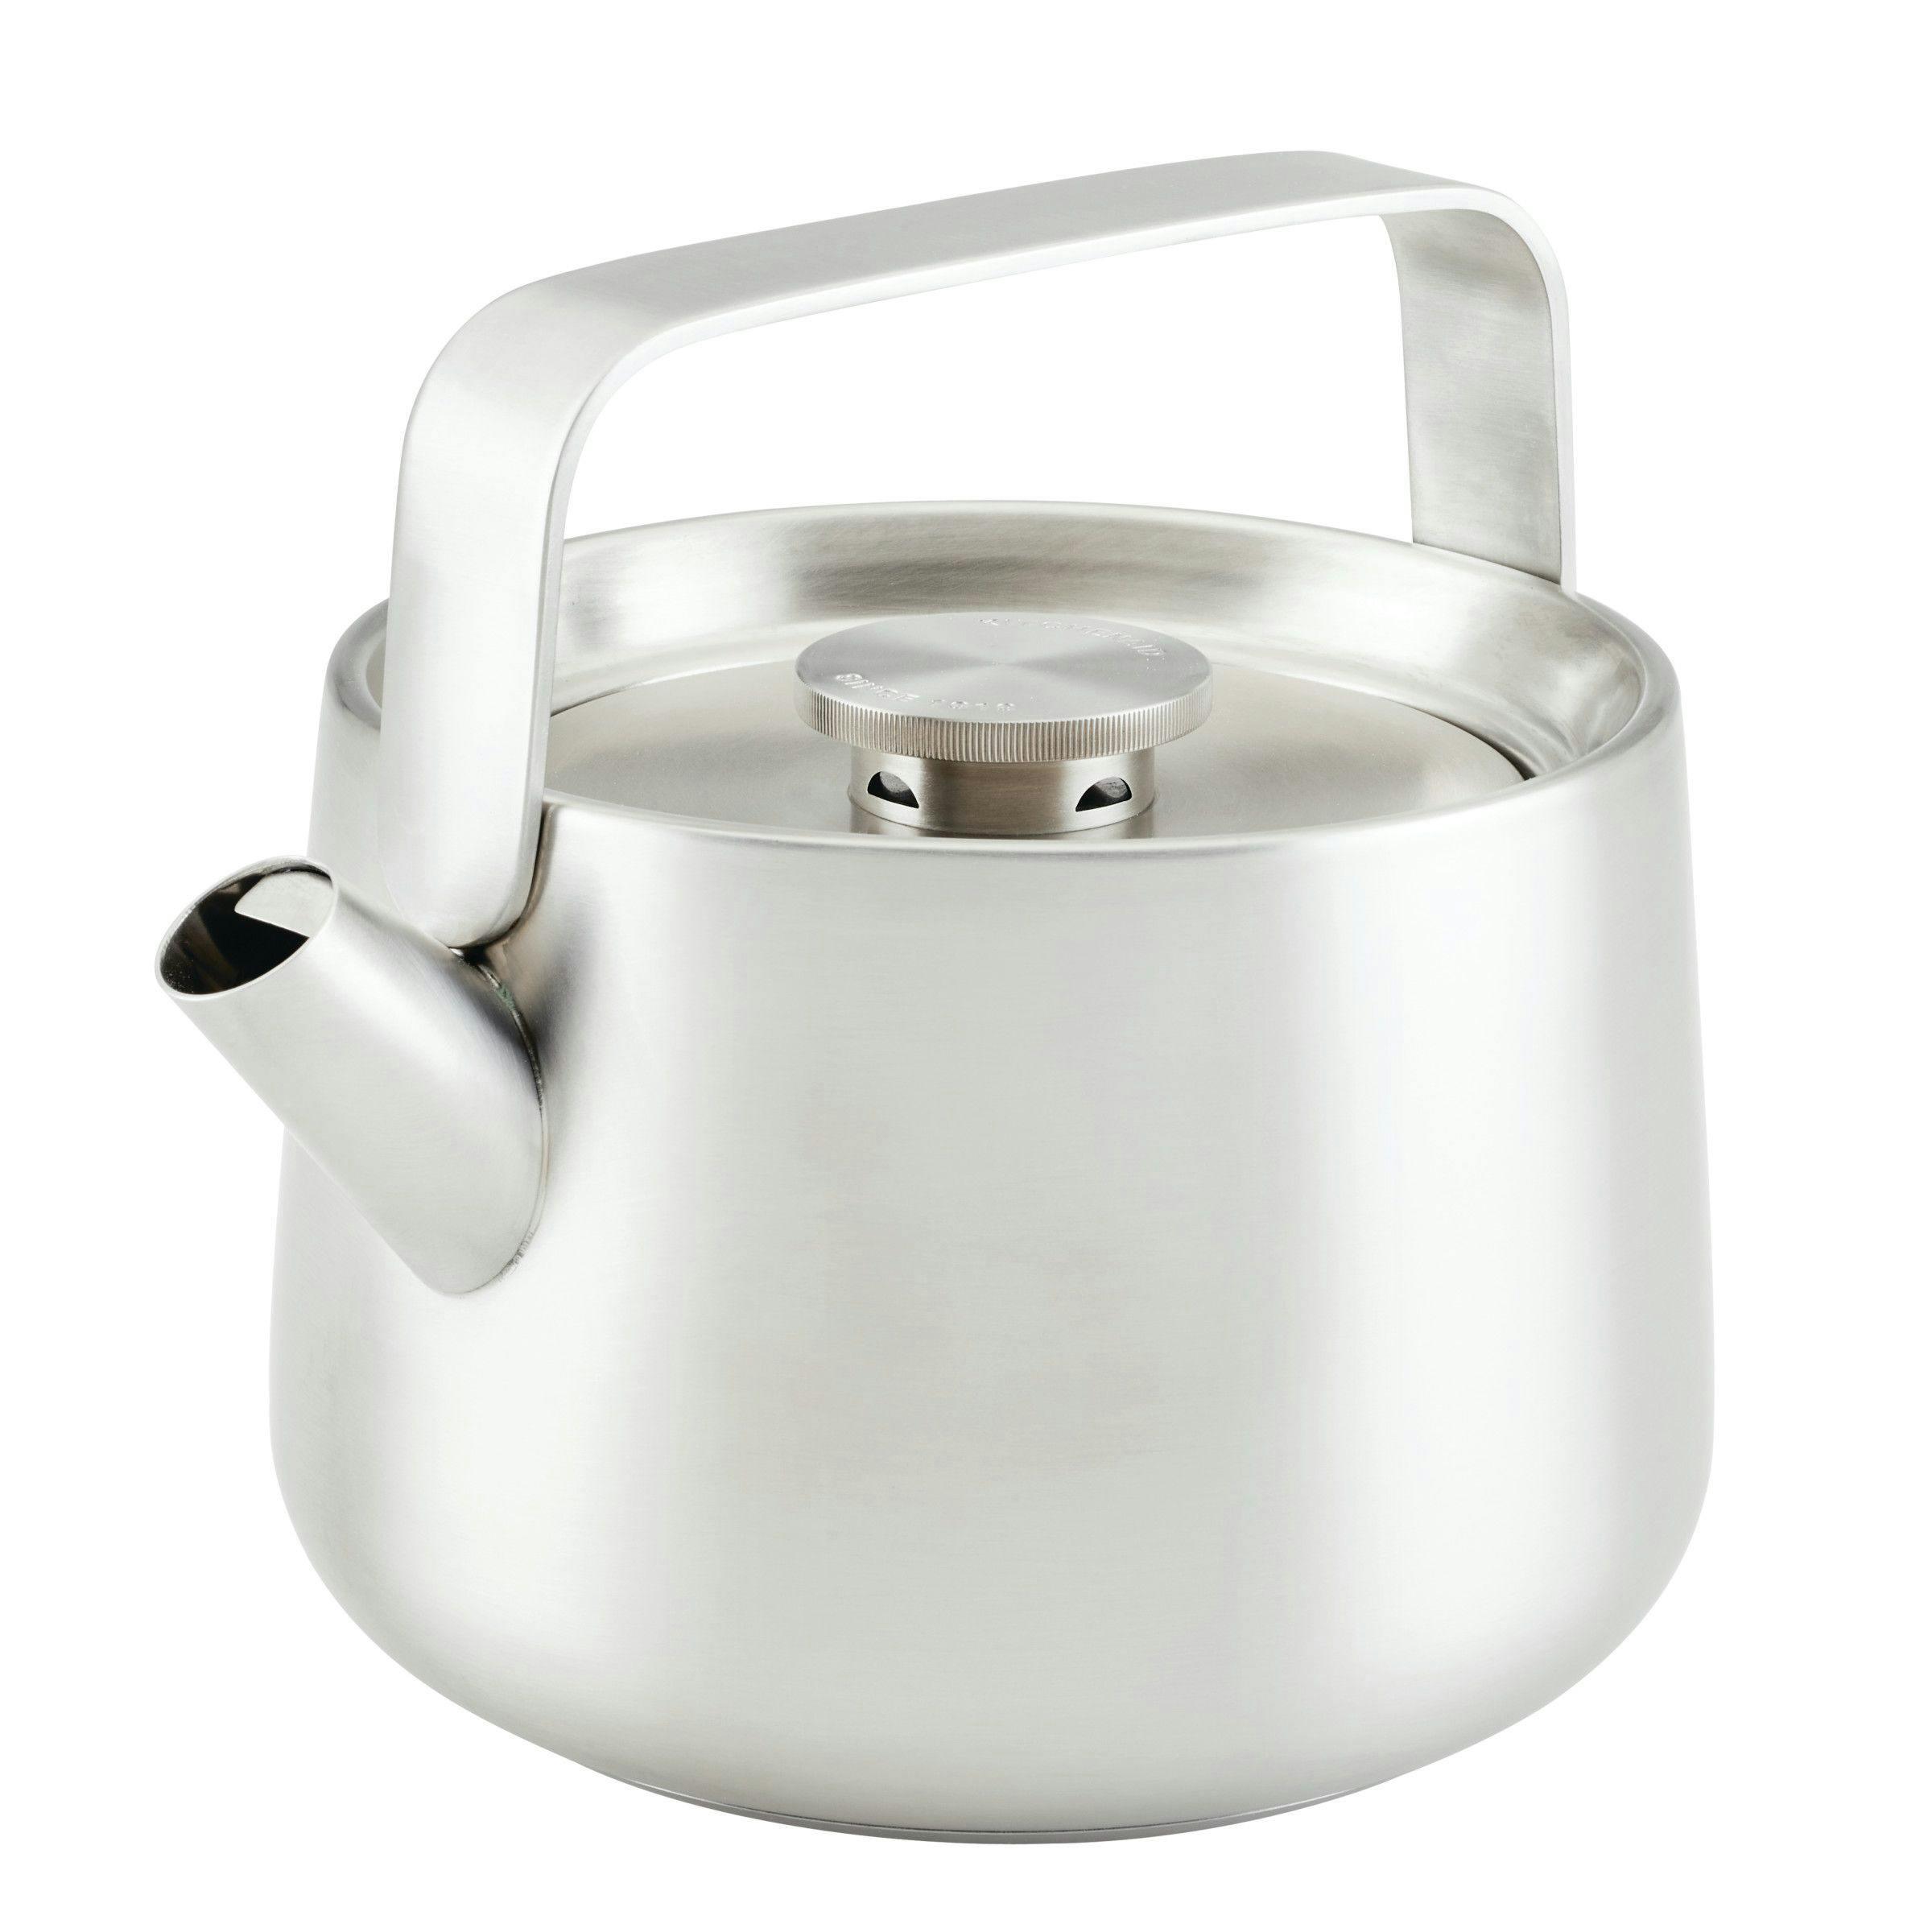 KitchenAid Stainless Steel Whistling Induction Teakettle, 1.9-Quart, Brushed Stainless Steel